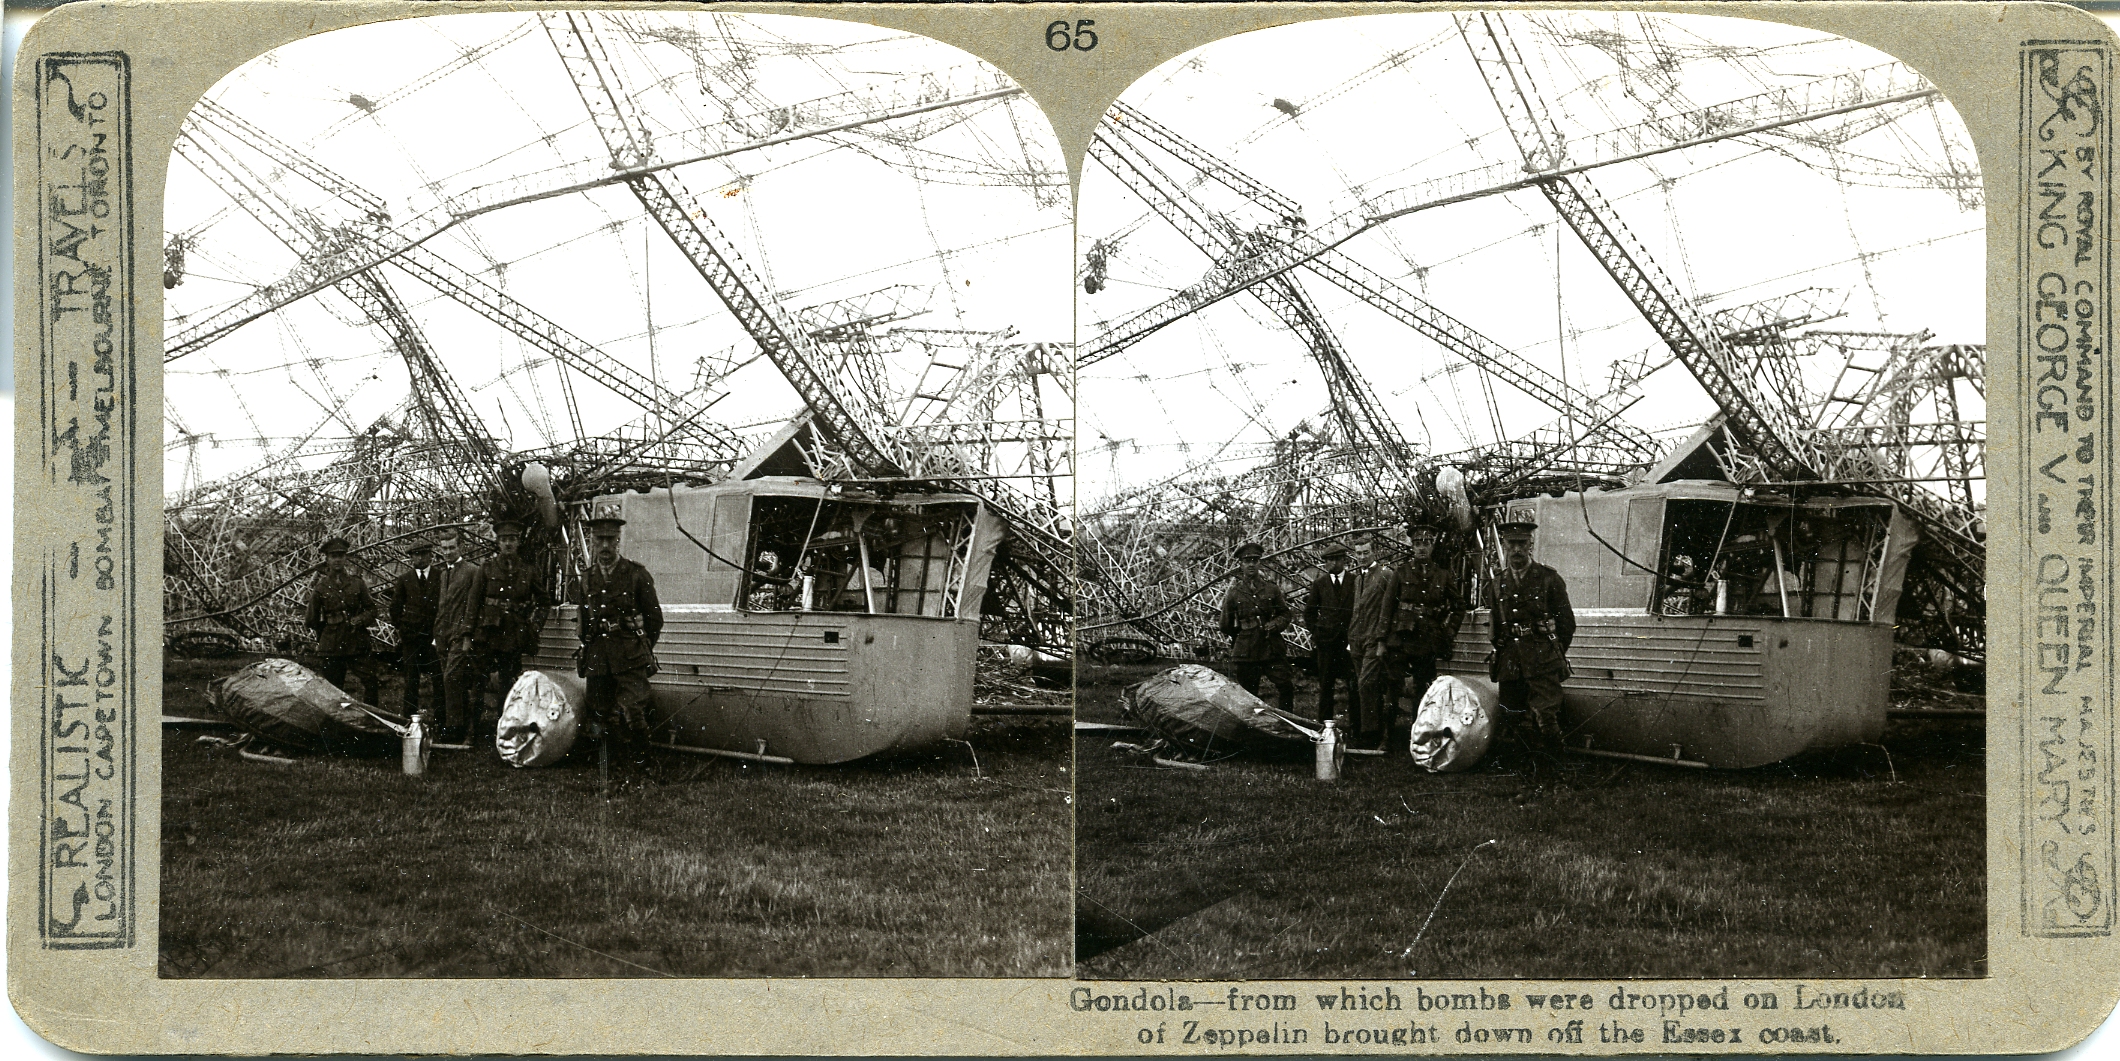 Gondola of Zeppelin raider which dropped bombs on London, brought down near the Essex coast